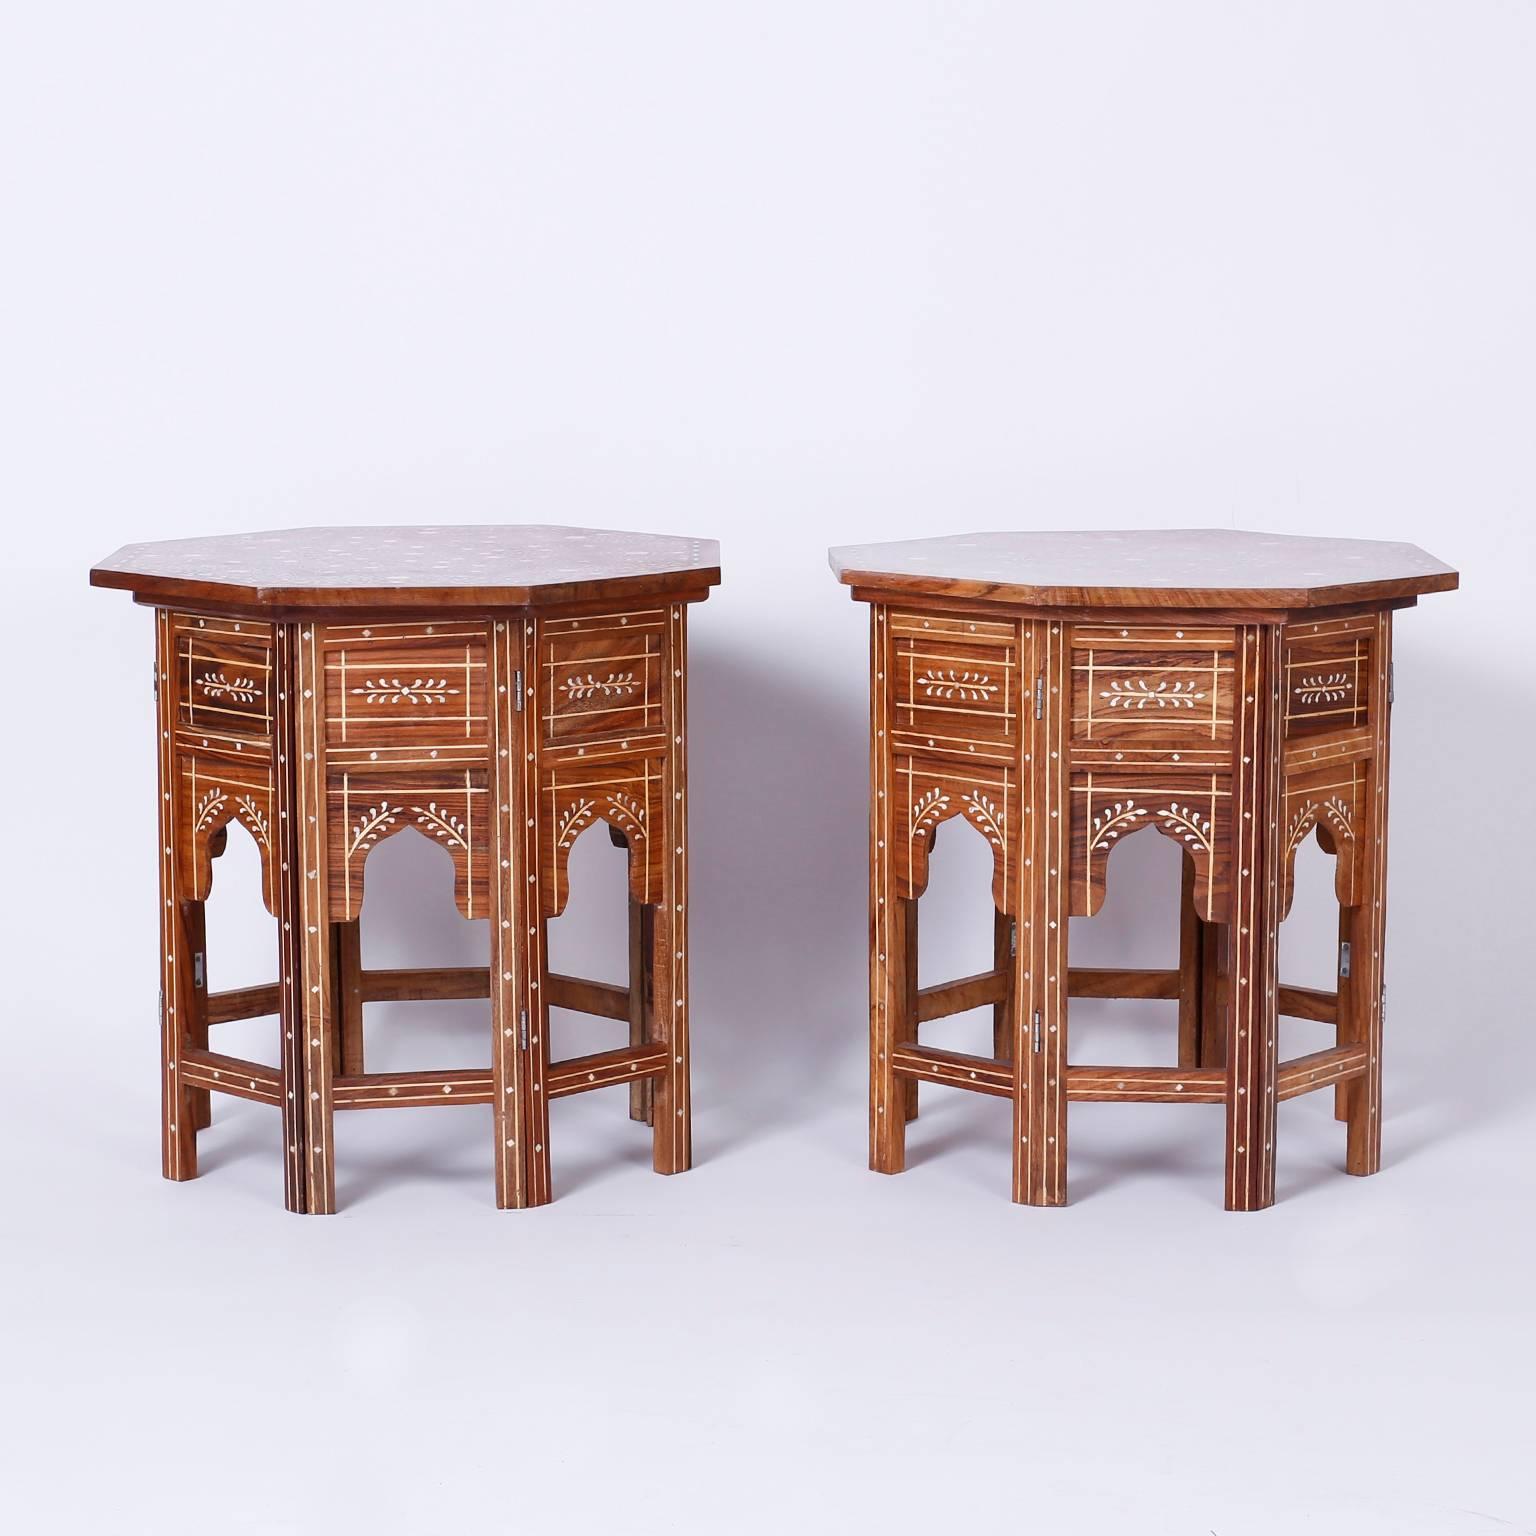 Exotic pair of vintage Syrian mahogany hexagon side or end tables with
elaborate inlaid symbolic floral designs on top over a base with six
Moorish ashes and geometric bone inlays.